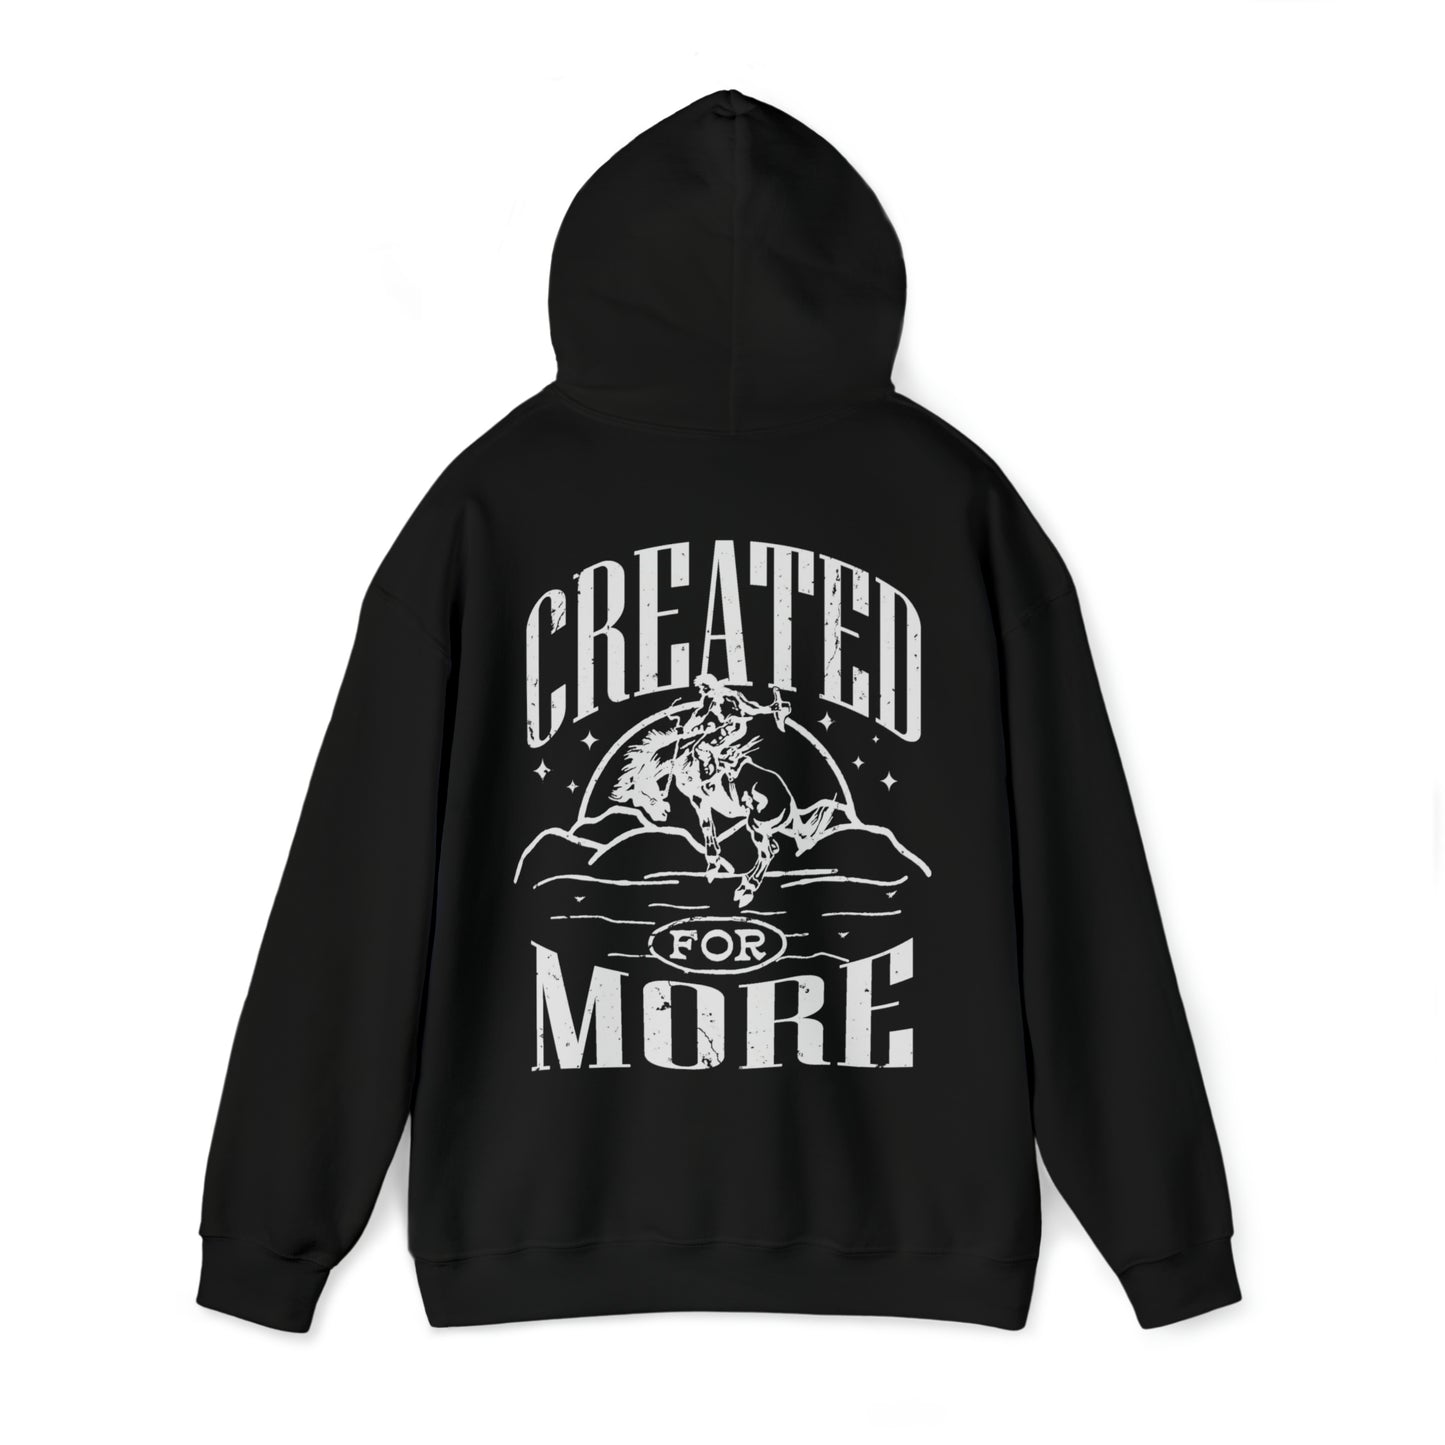 Created for More Hoodie